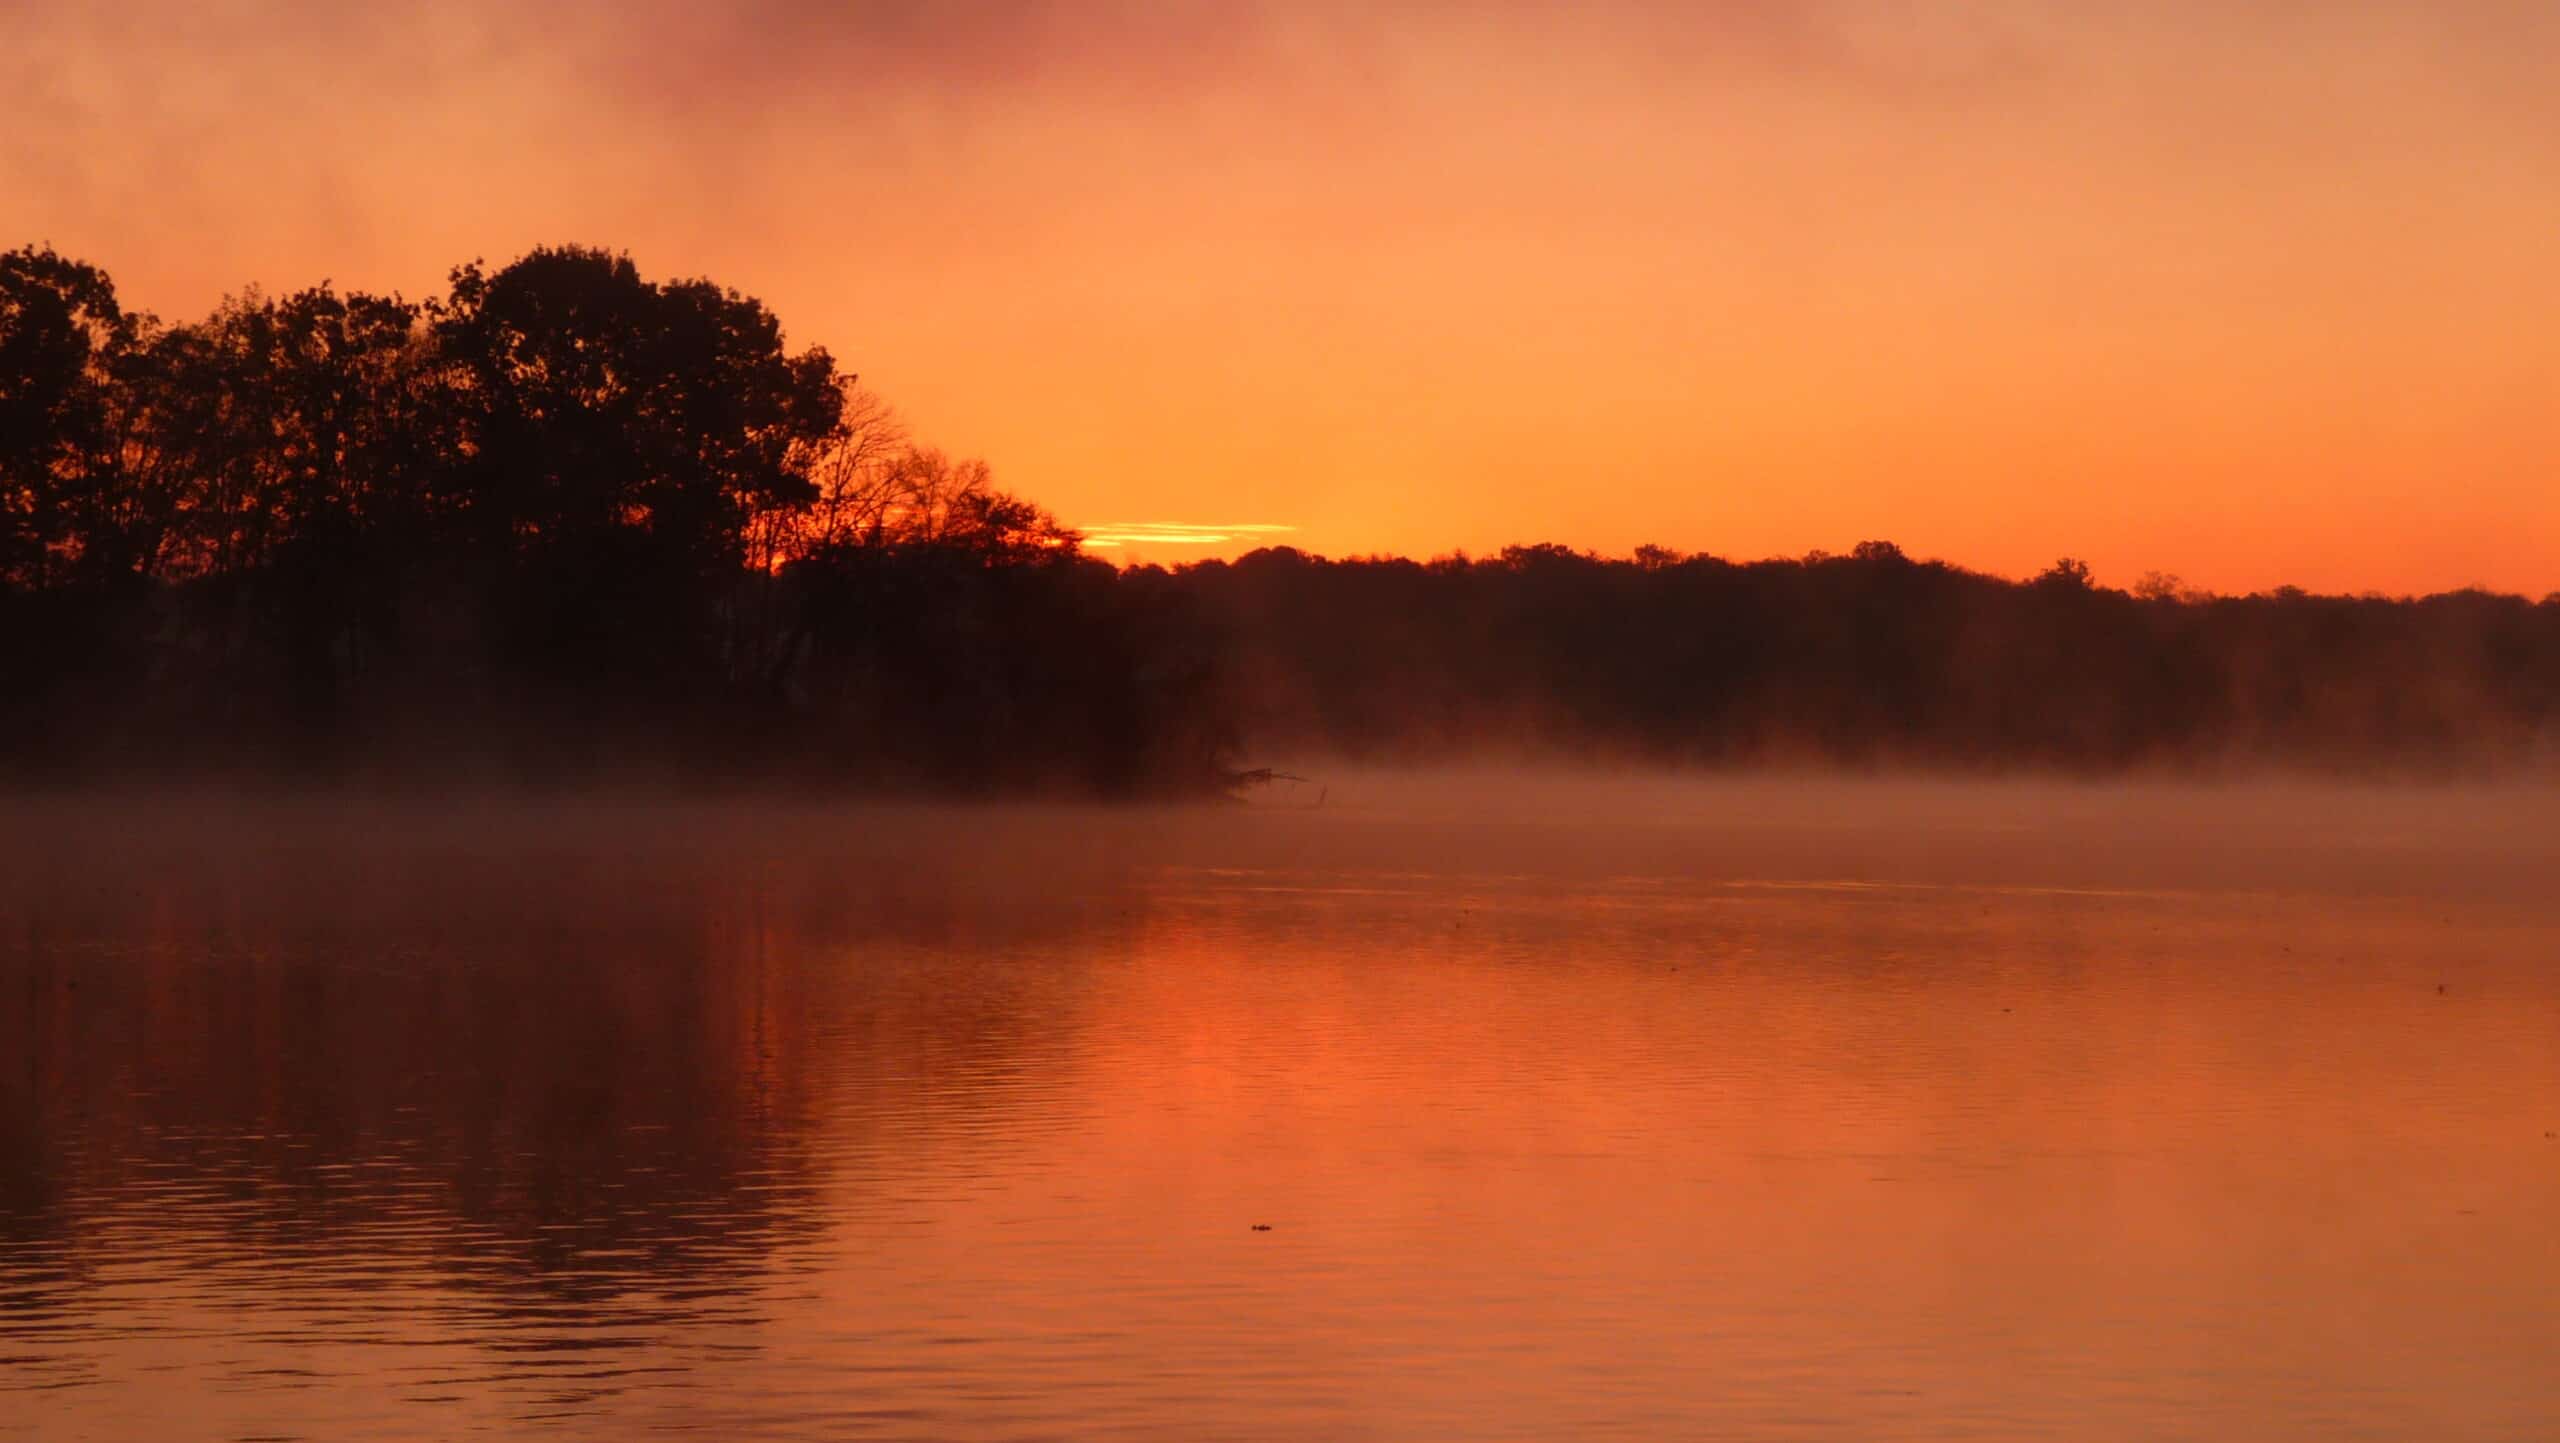 Sunrise on Old Hickory Lake in Hendersonville, Tennessee